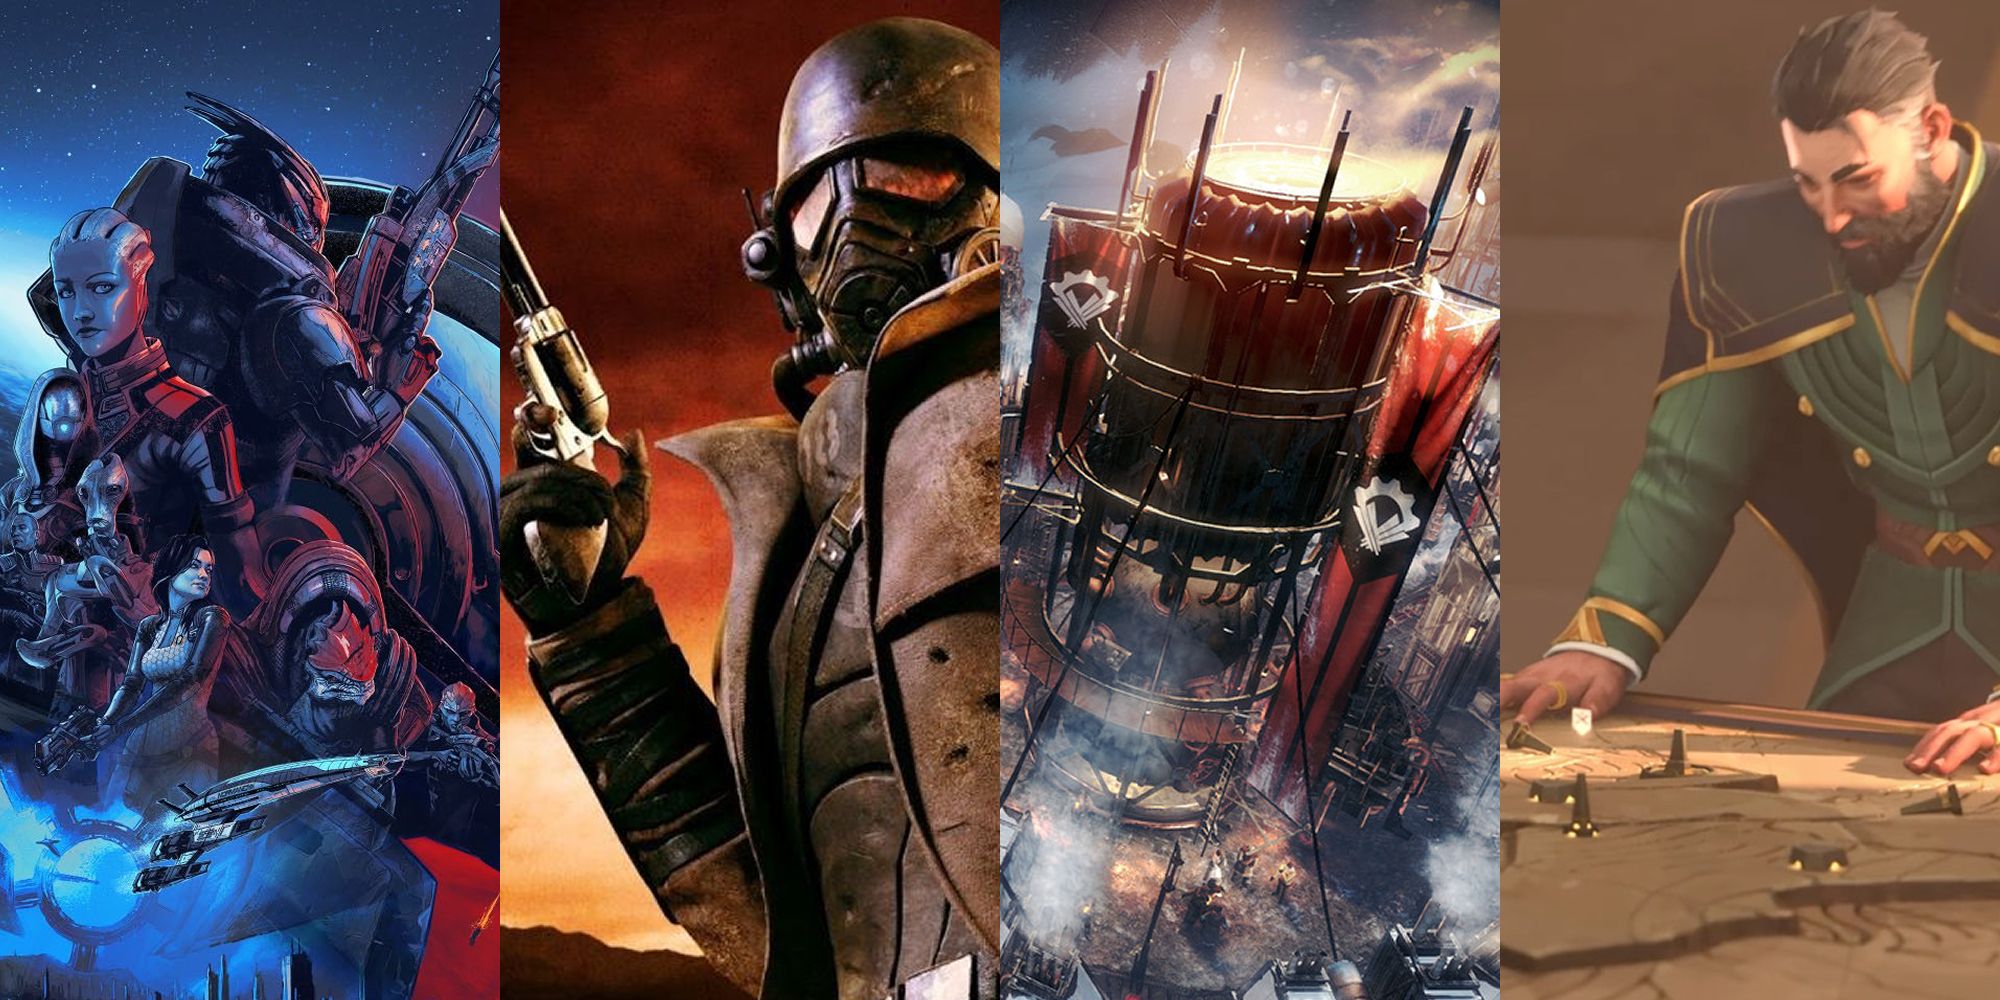 A Split Image Showing Scenes From Dune Spice Wars, Mass Effect, Frostpunk, and Fallout New Vegas